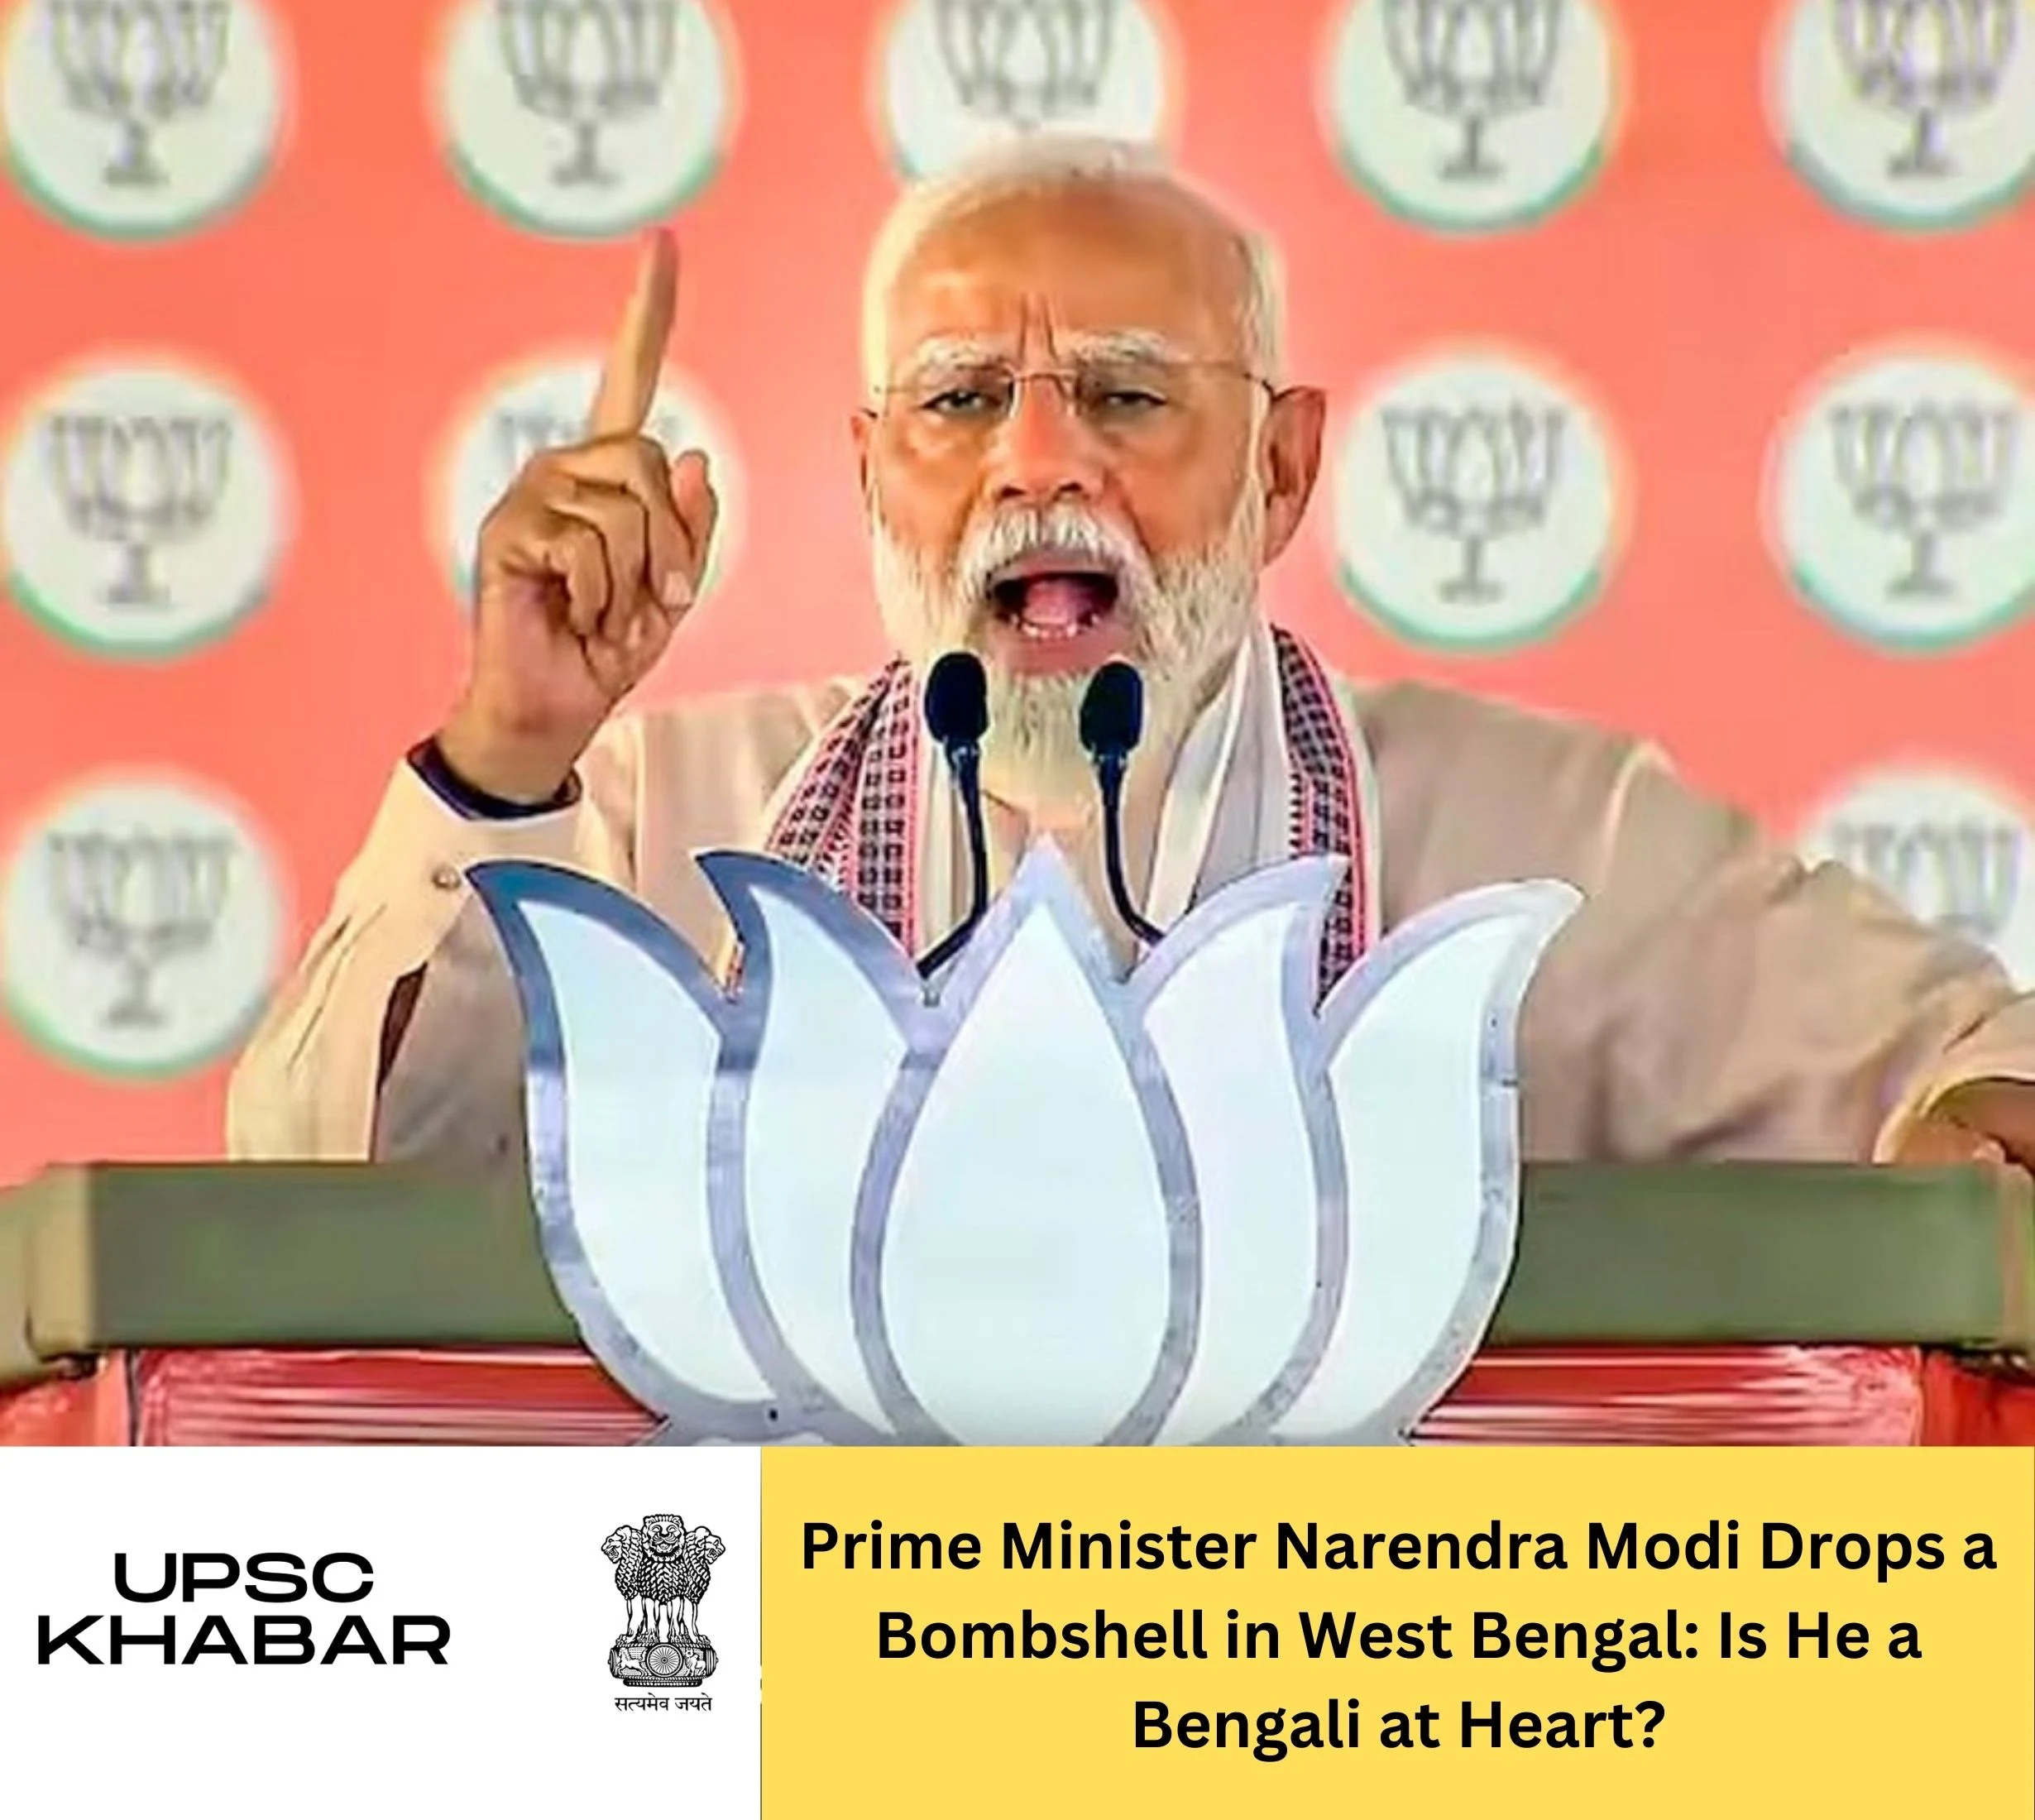 Prime Minister Narendra Modi Drops a Bombshell in West Bengal: Is He a Bengali at Heart?